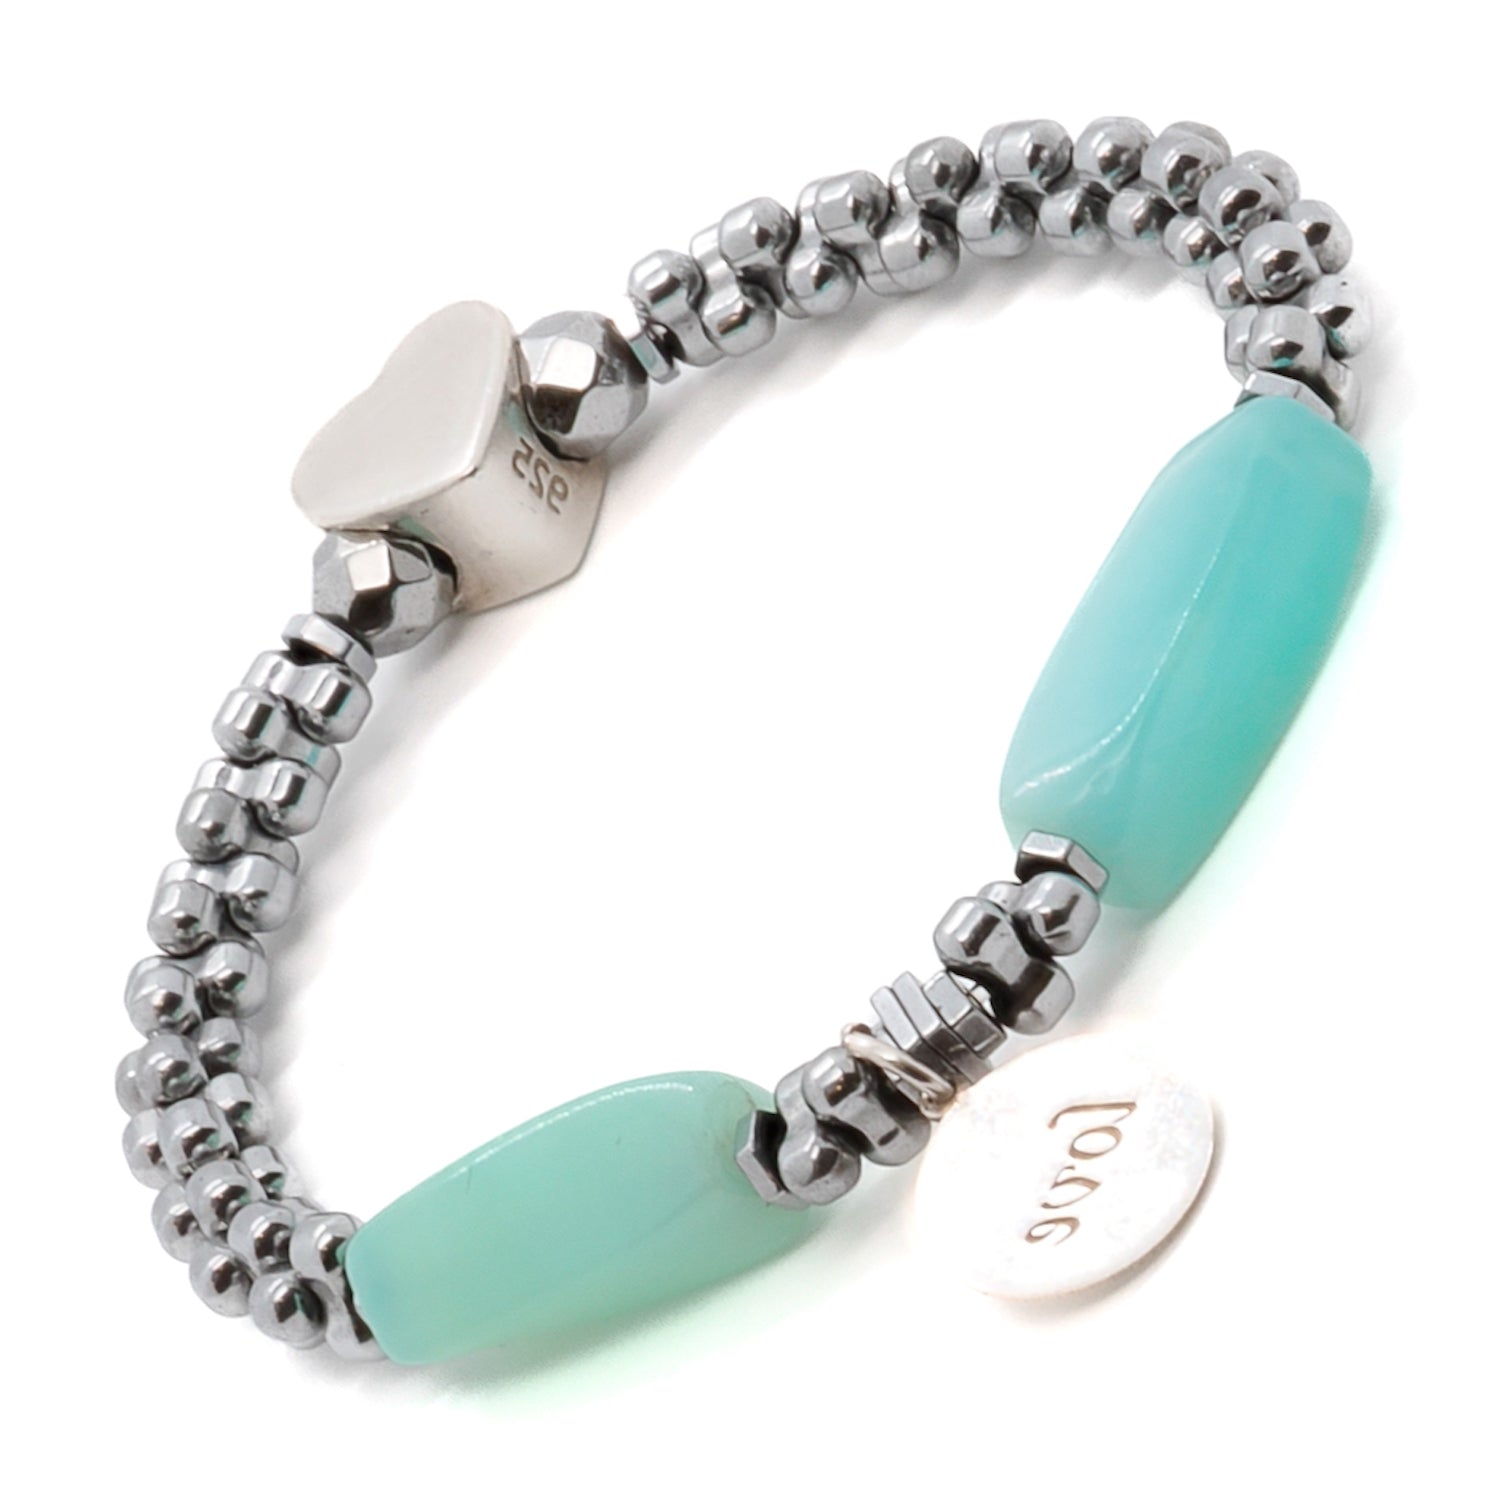 Aquamarine Cylinder Beads Bracelet with Love Charm and Hematite Spacers